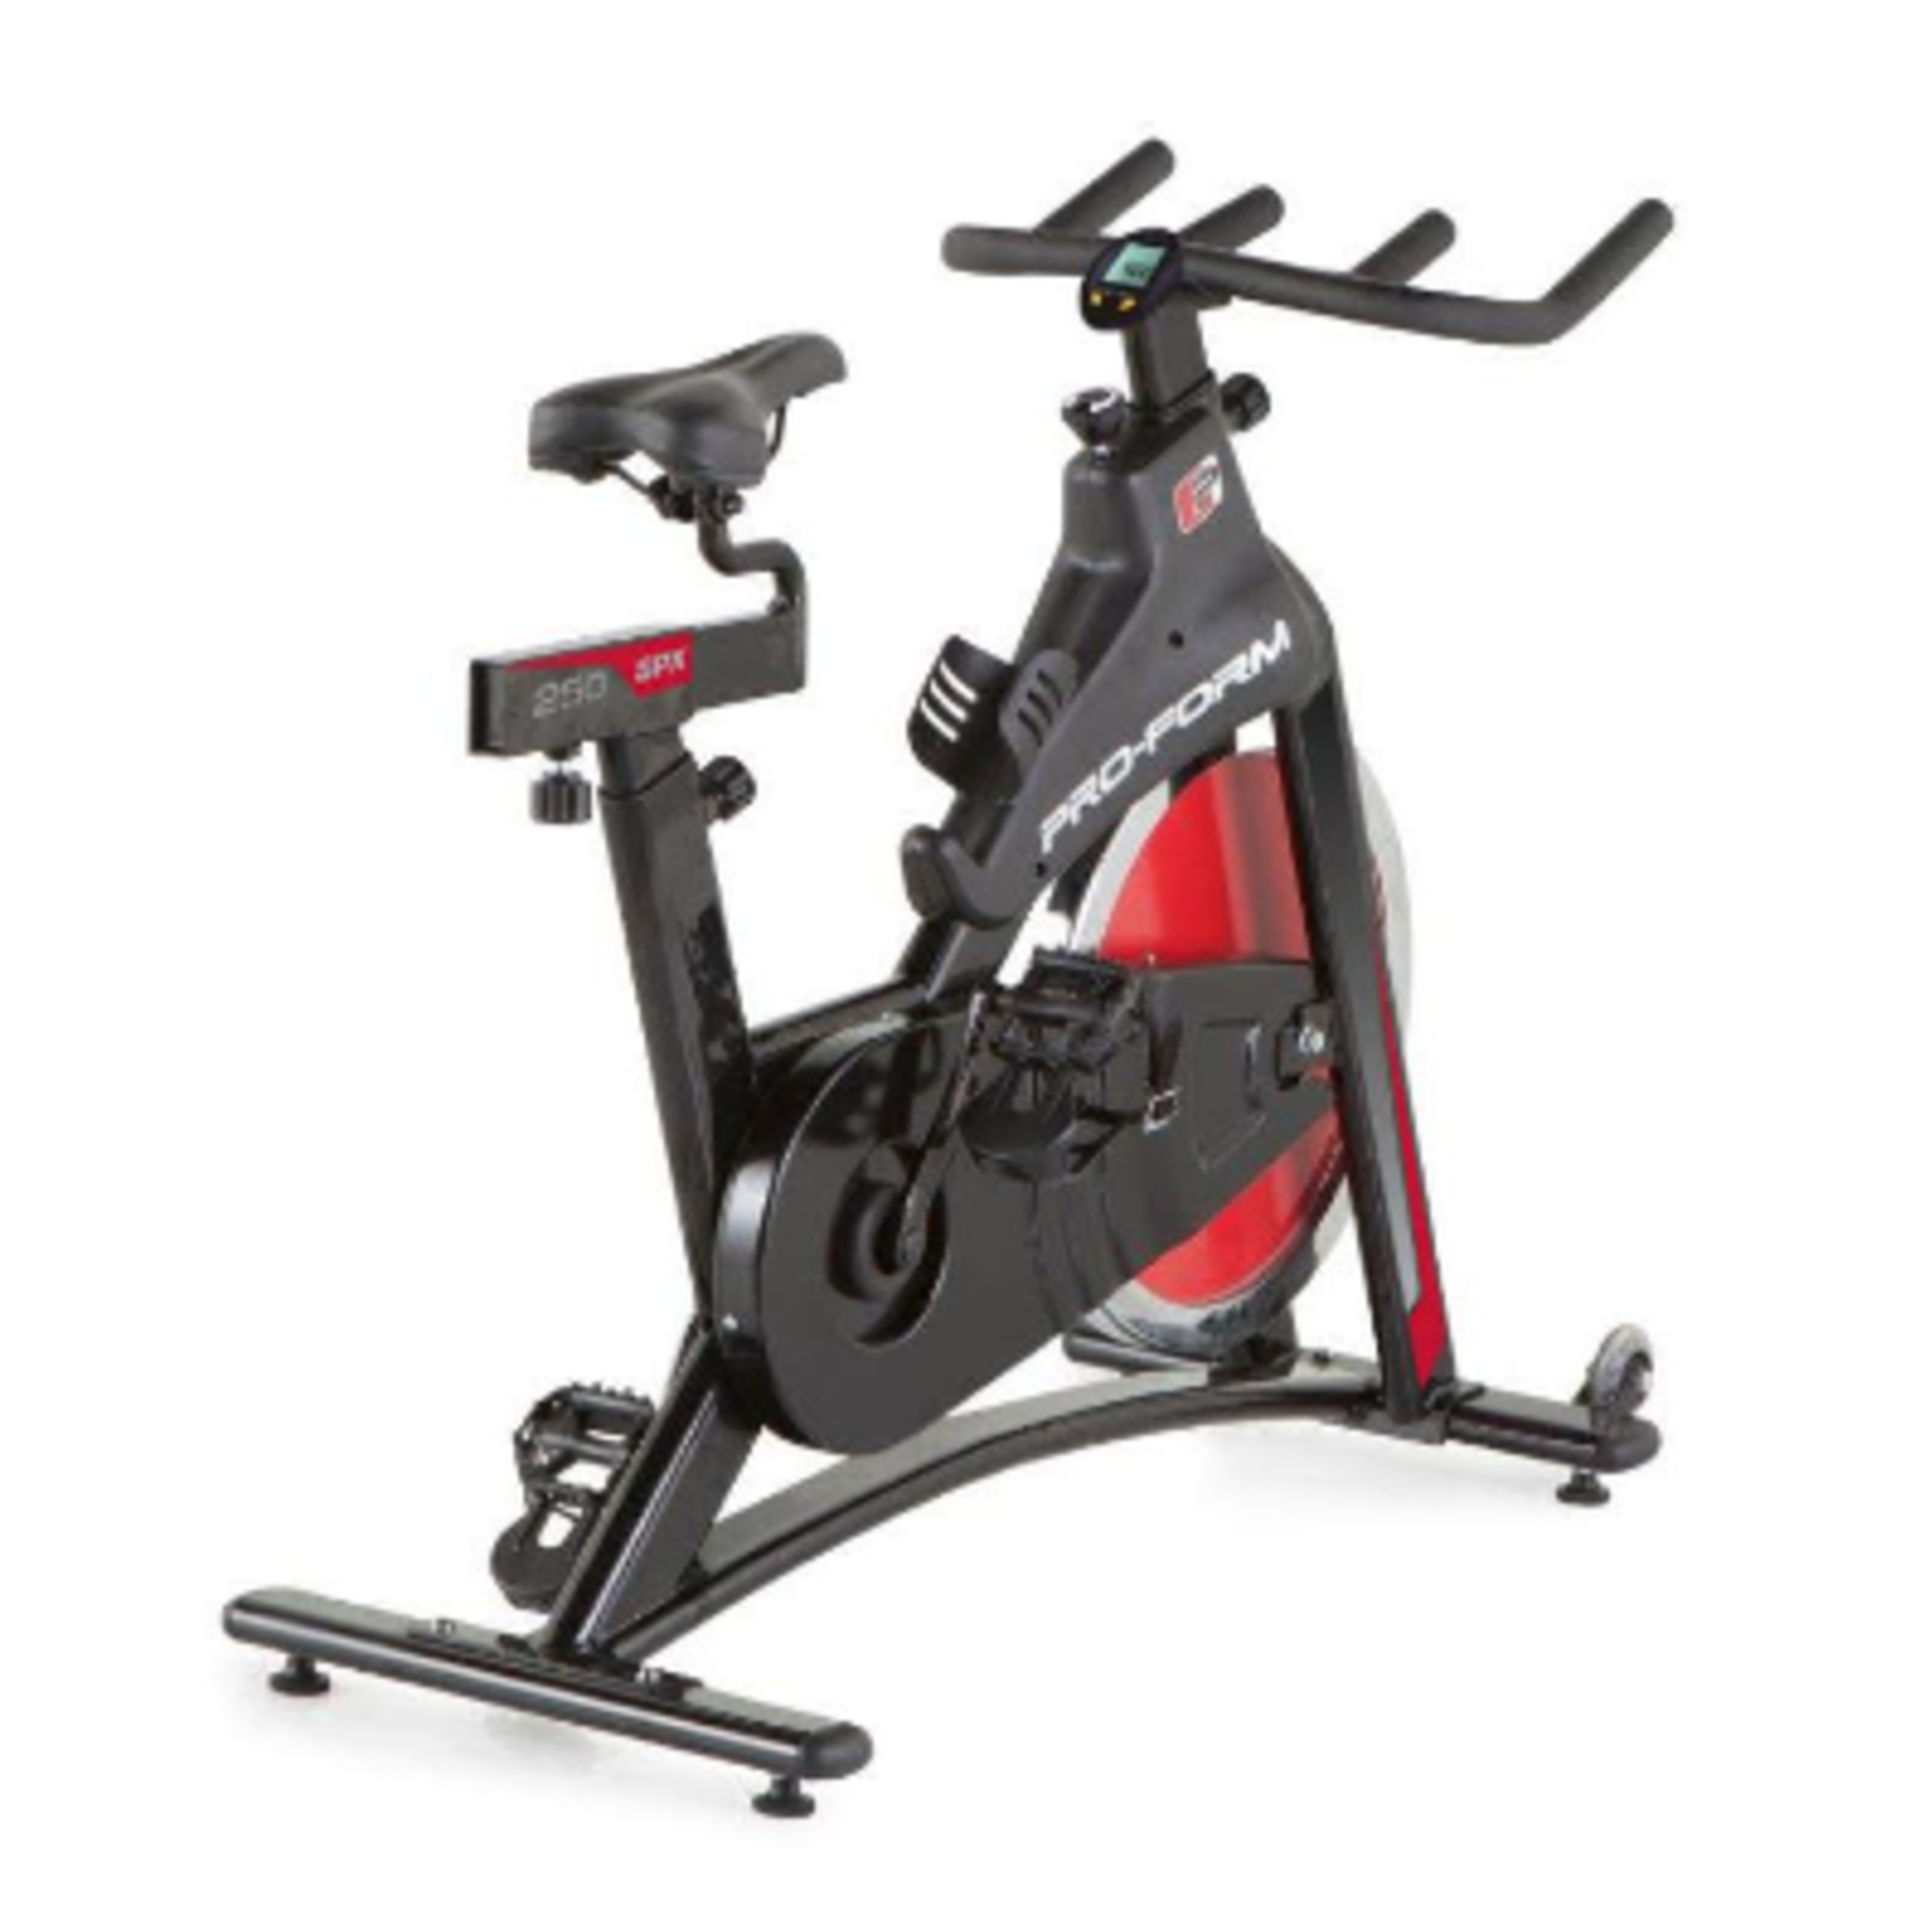 Pro-Form - SPX 250 Indoor Cycle Exercise Bike - Used Condition, Still Very Usable.